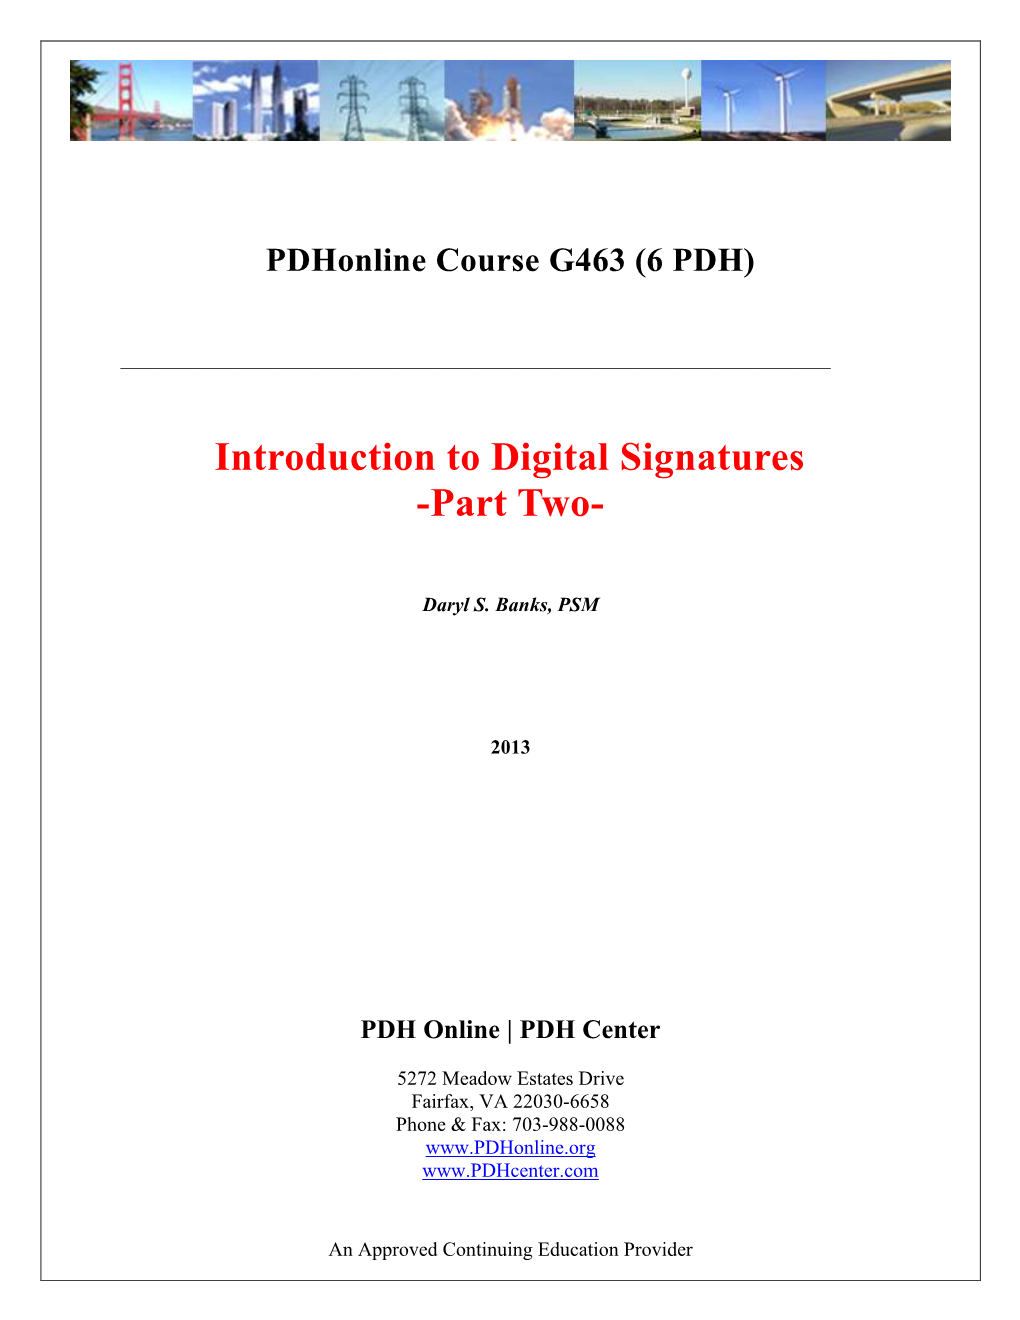 Introduction to Digital Signatures -Part Two